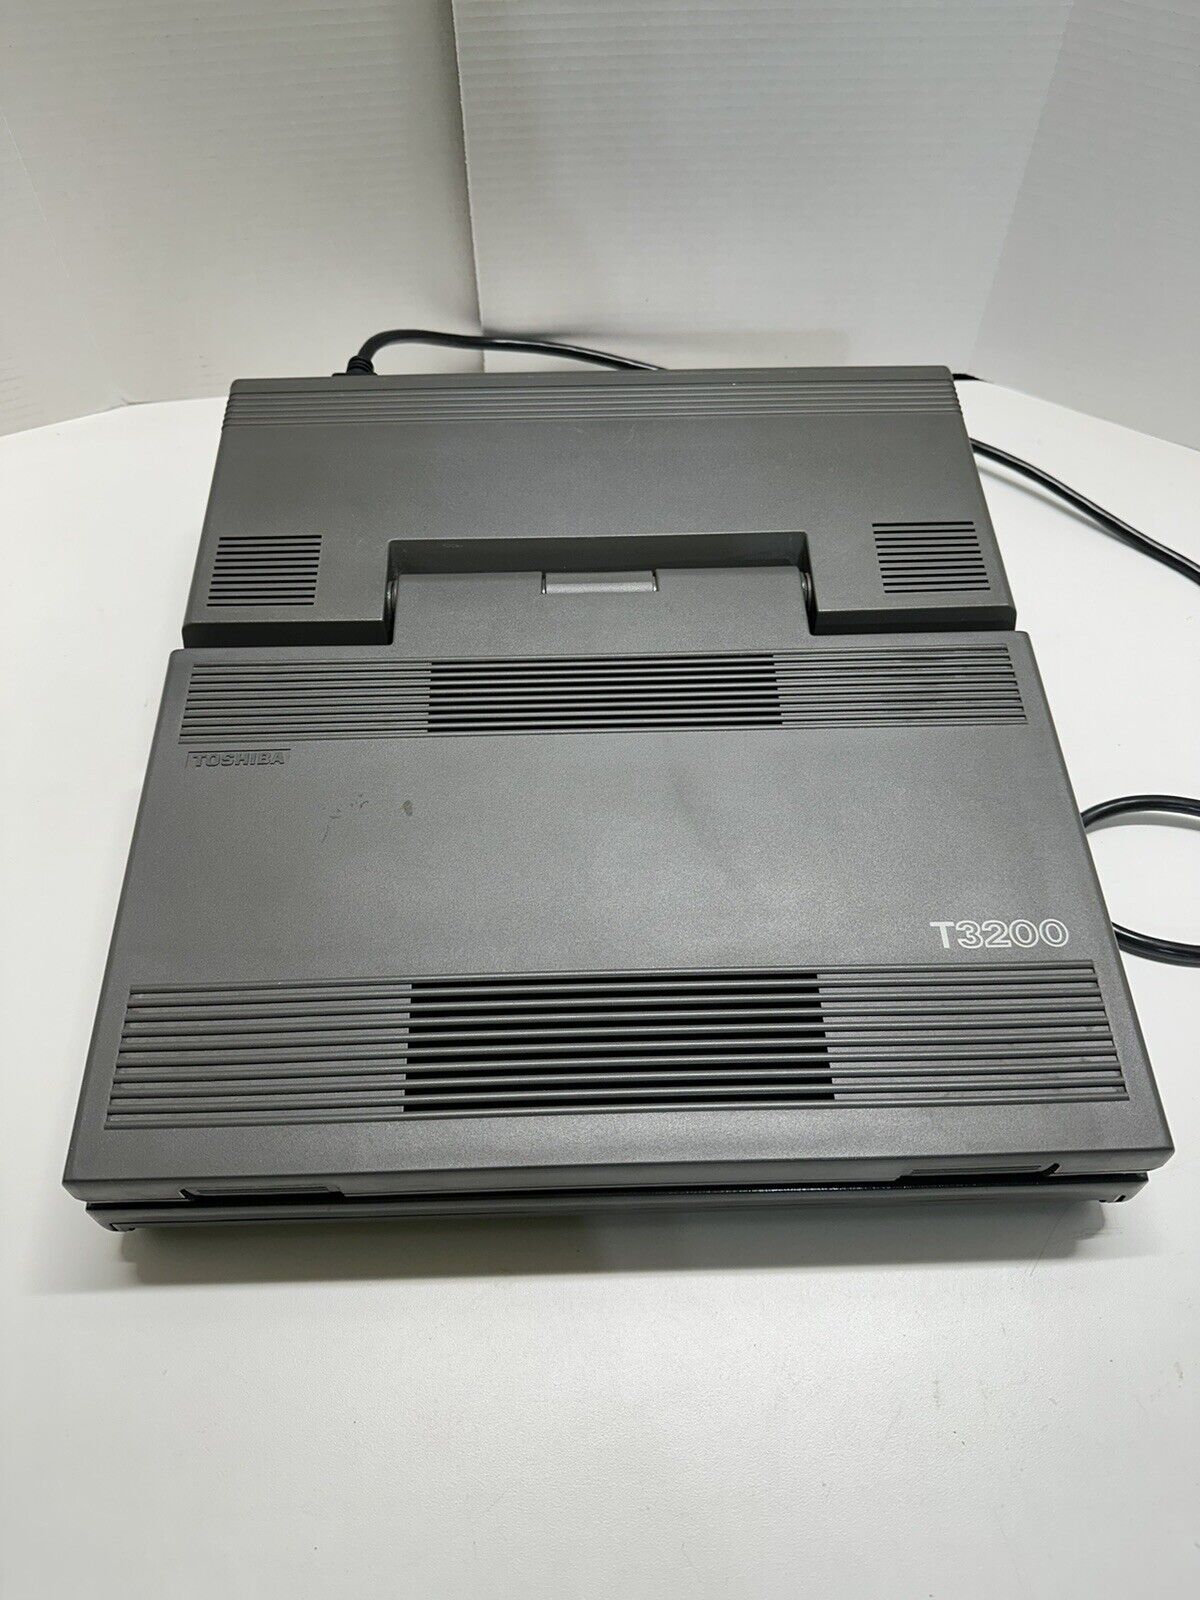 Vintage Toshiba T3200 System Unit Portable Computer Laptop For Parts Or Repair